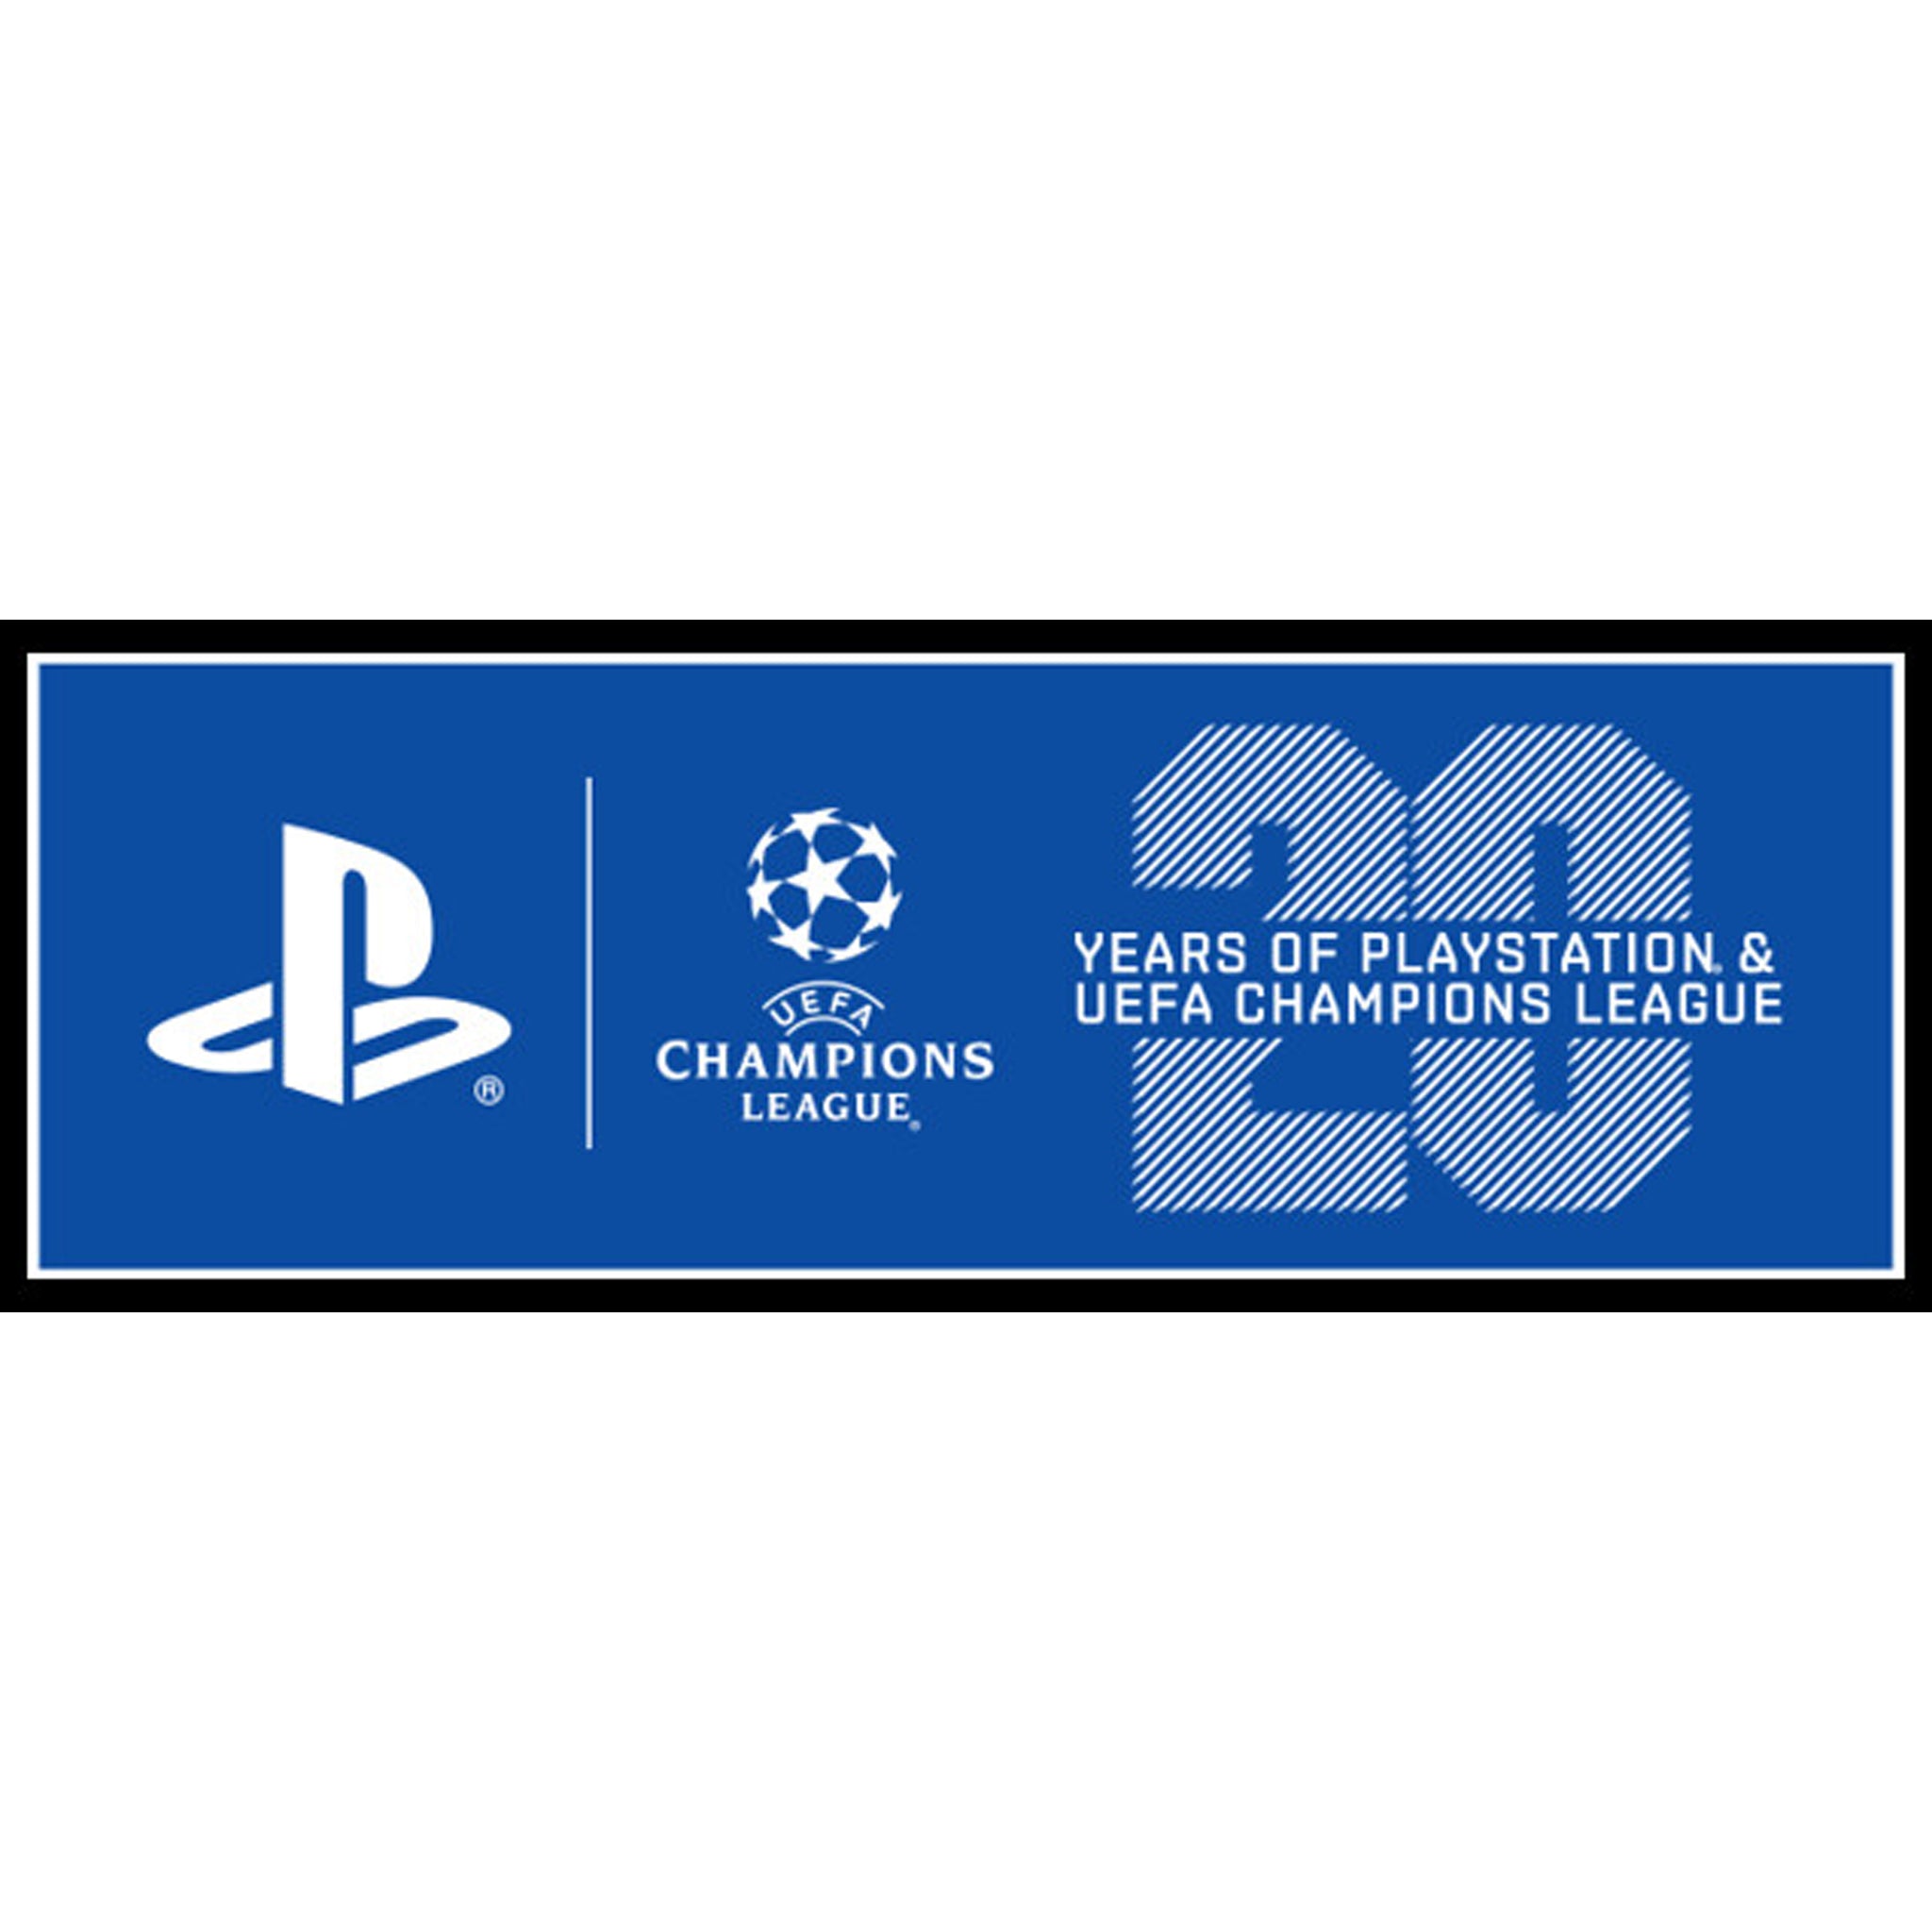 UEFA Champions League 20 Years of Playstation Promo Polo Shirt Top Blue XL